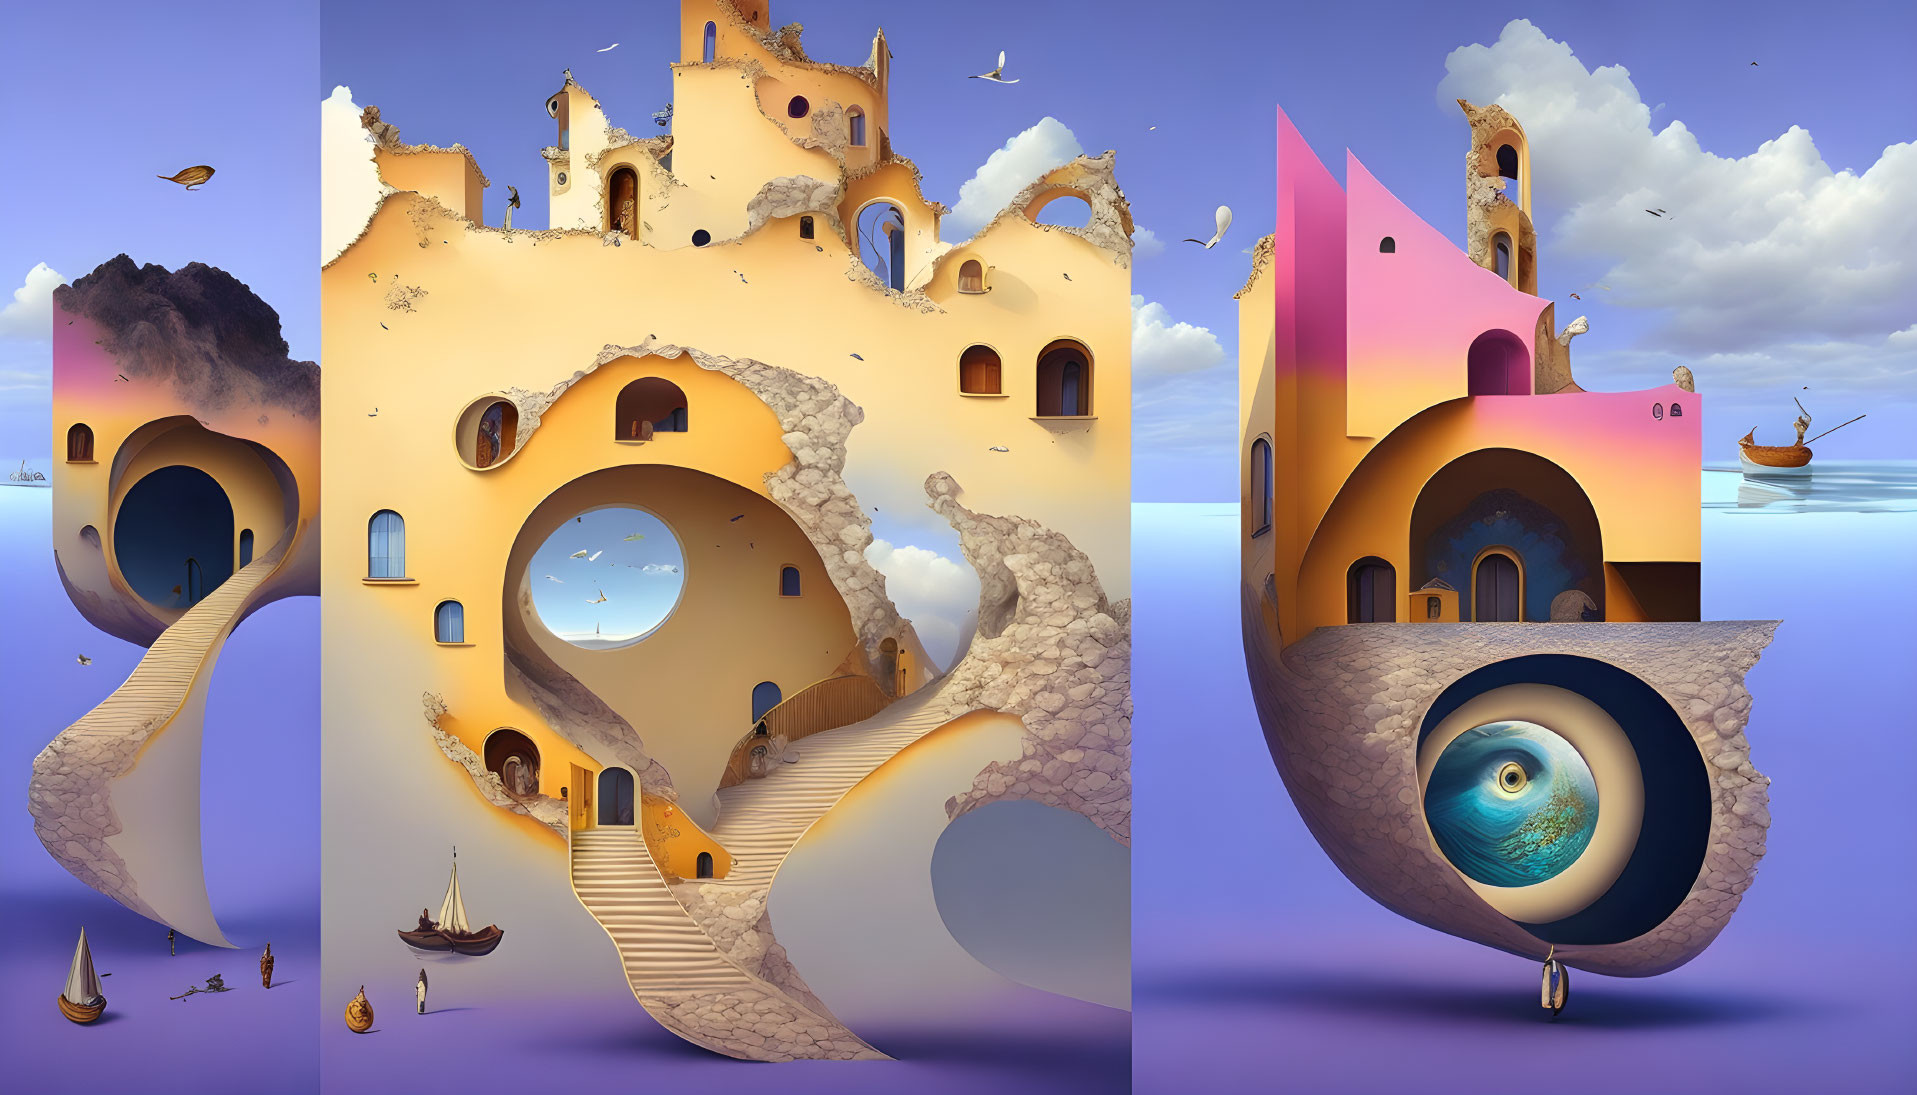 Surreal triptych image: sandcastle-like structure, giant eye, staircases, boats